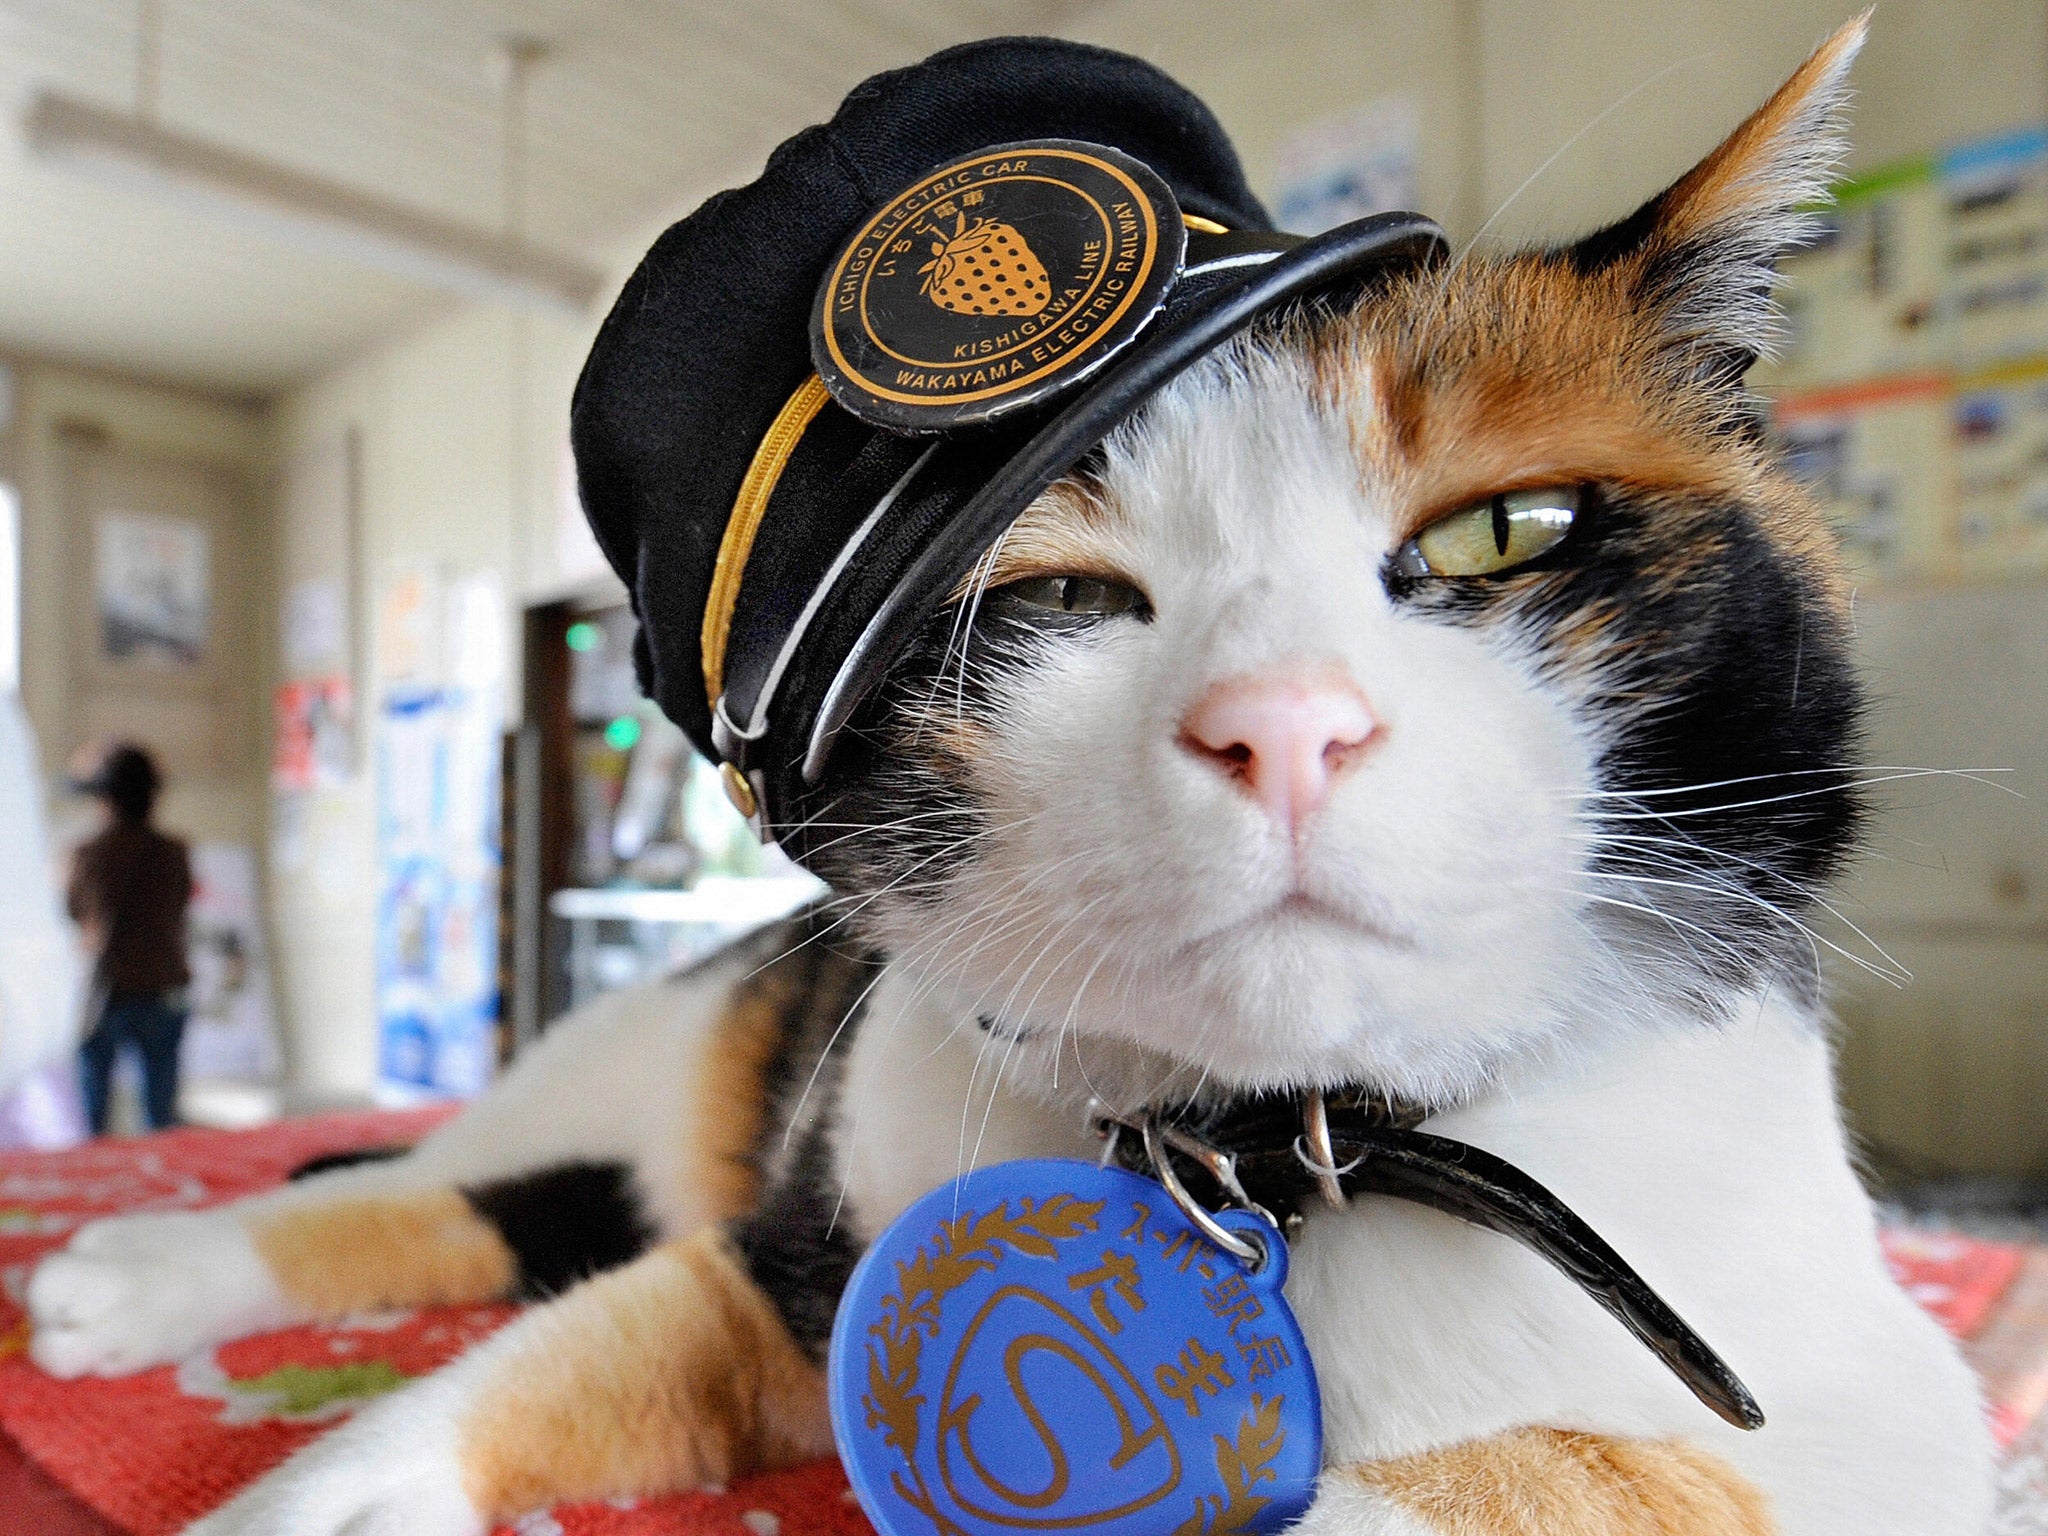 Tama, well known as stationmaster on the local Kishigawa railway line, died of heart failure in June